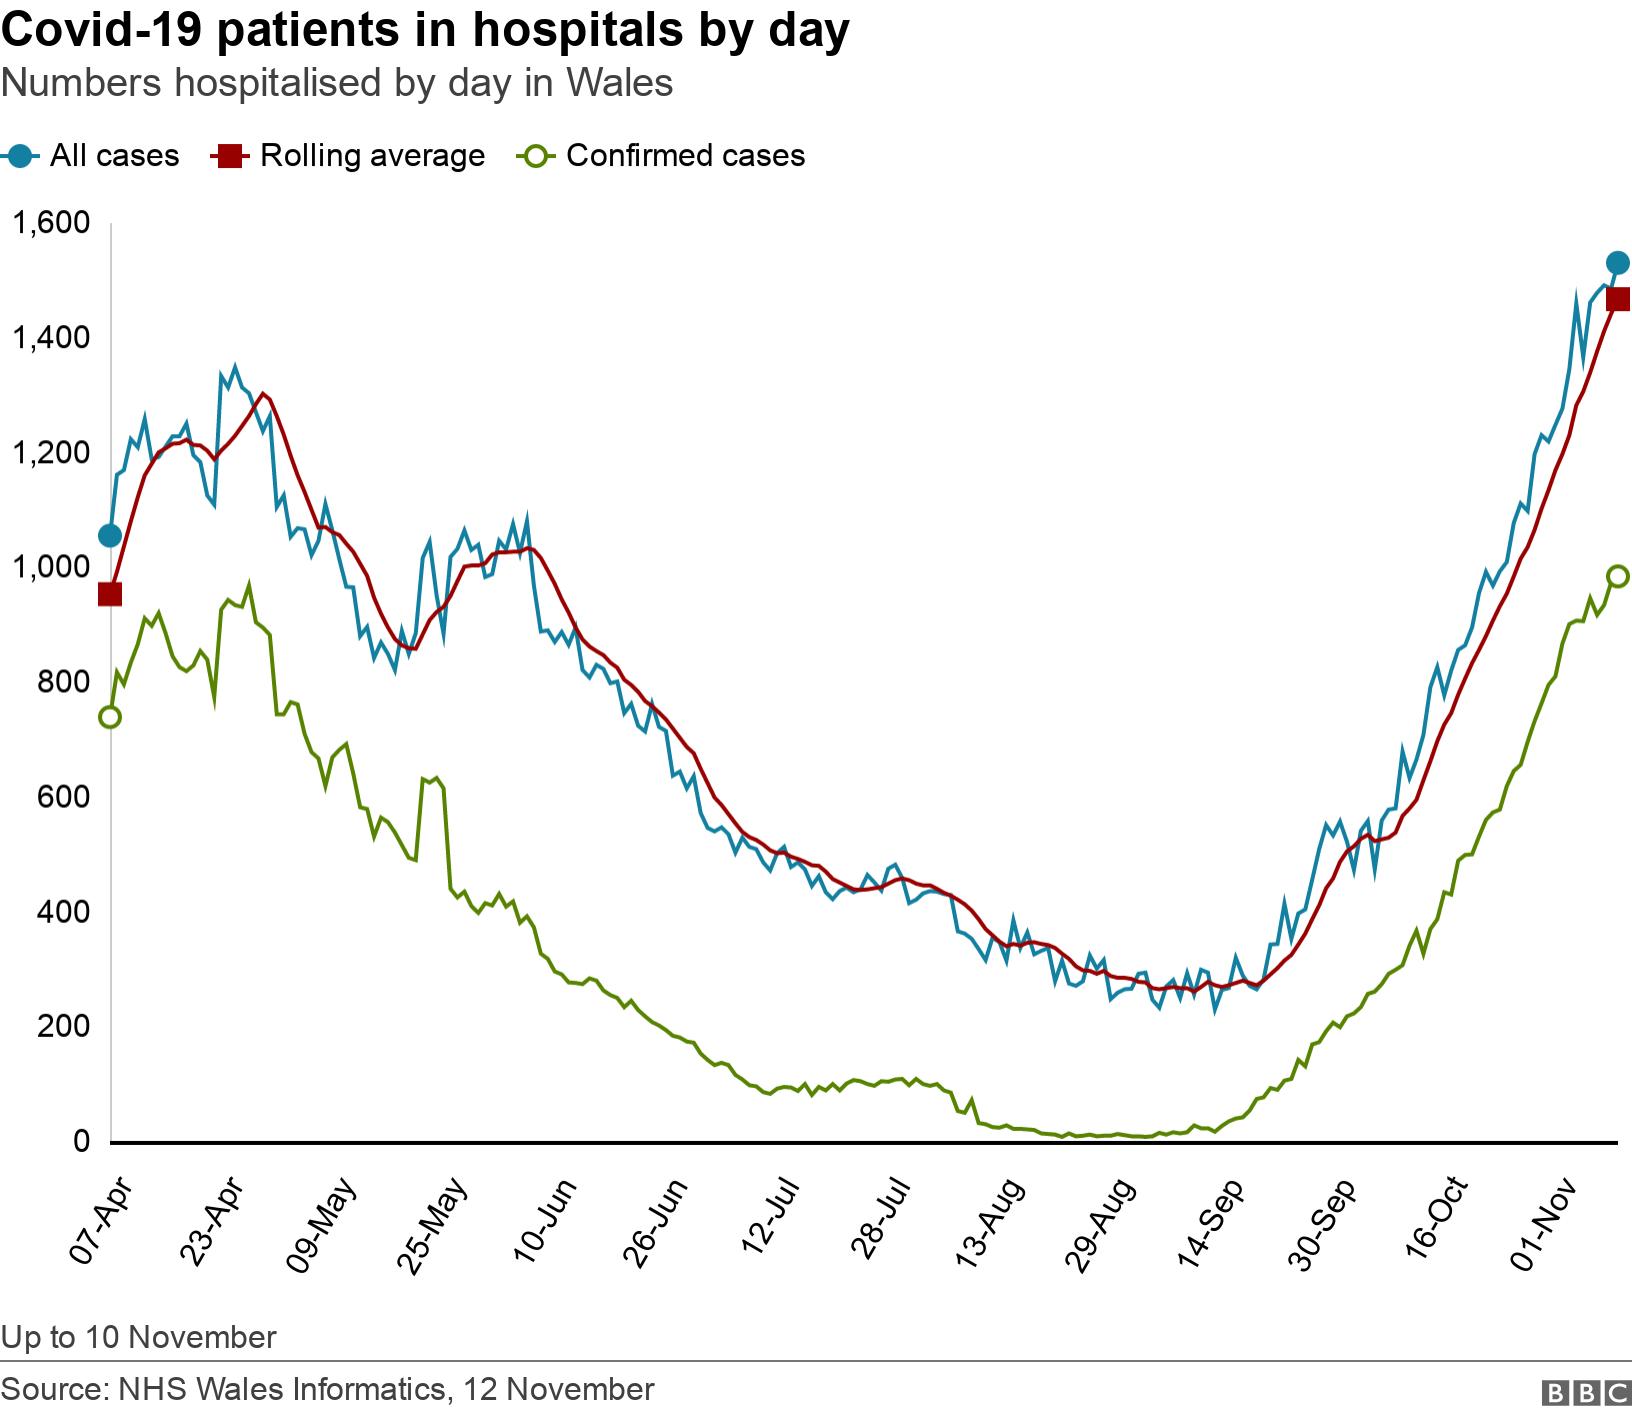 Covid-19 patients in hospitals by day. Numbers hospitalised by day in Wales. Up to 10 November.